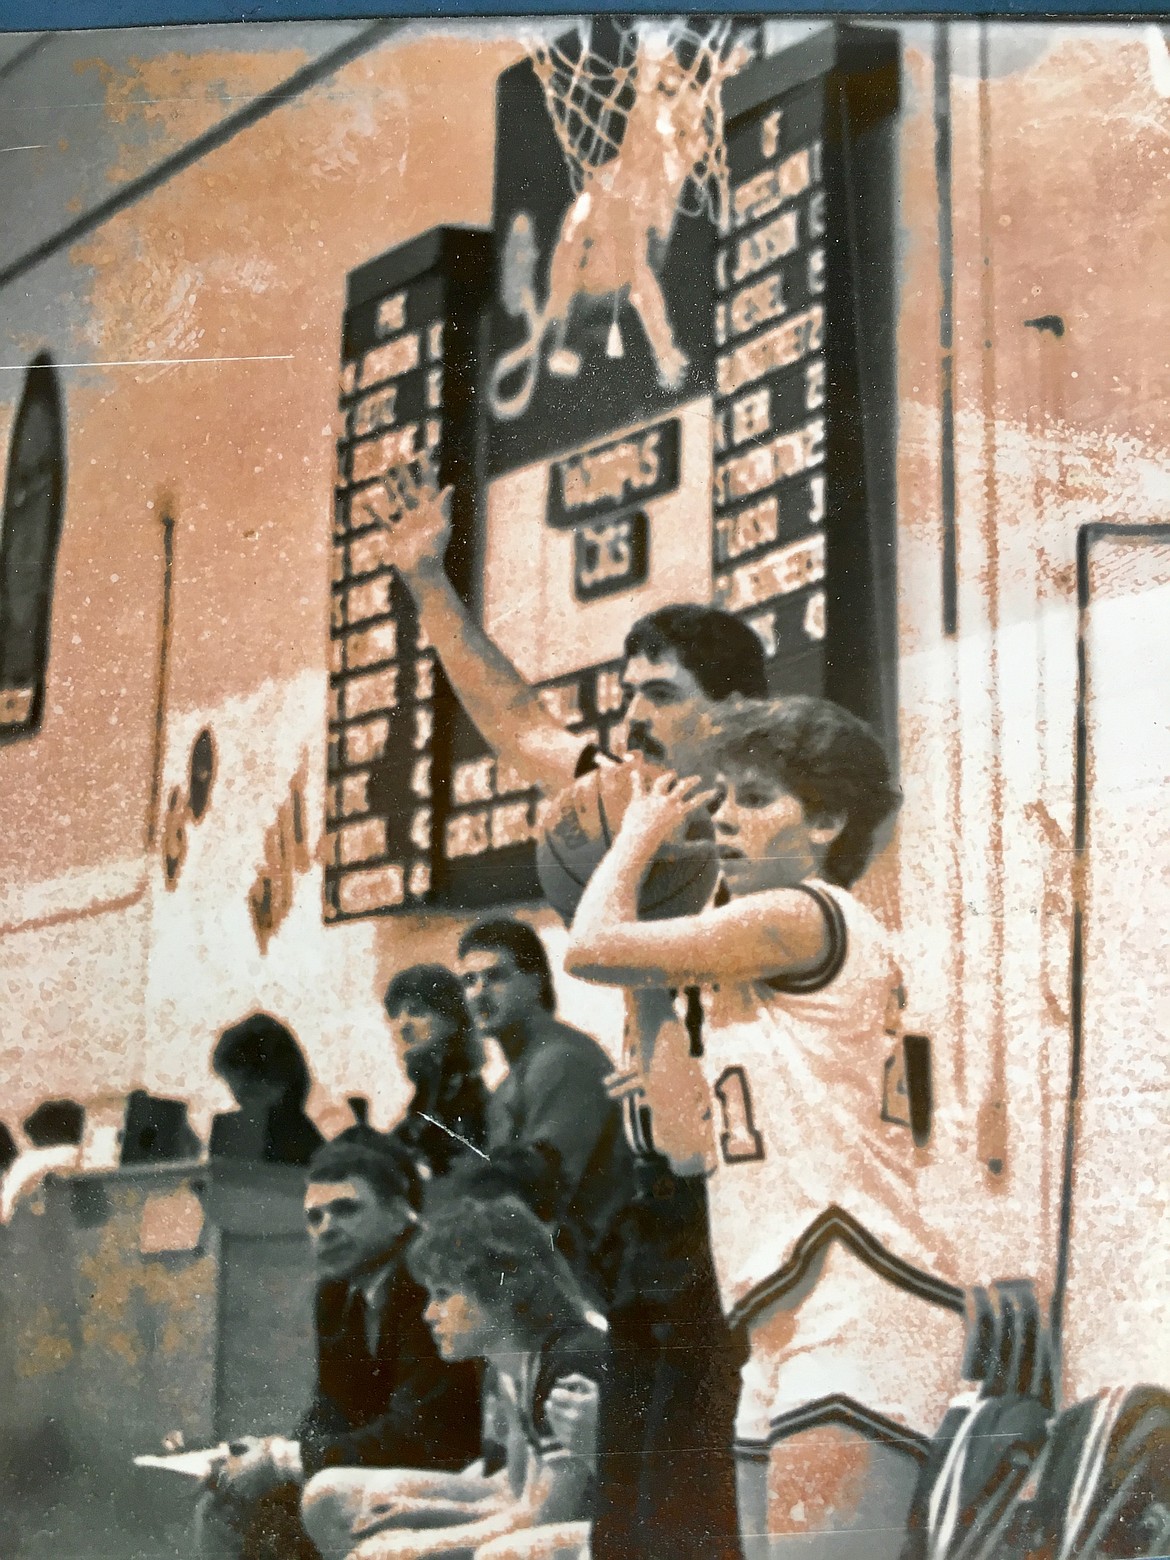 Photo by CHUCK LONGSTREET
Before they even knew each other, and reffed together, Bill Bopp officiates a Clark Fork girls basketball game as Wampus Cat Rayna Longstreet inbounds the ball in a game at Clark Fork in the late 1980s.